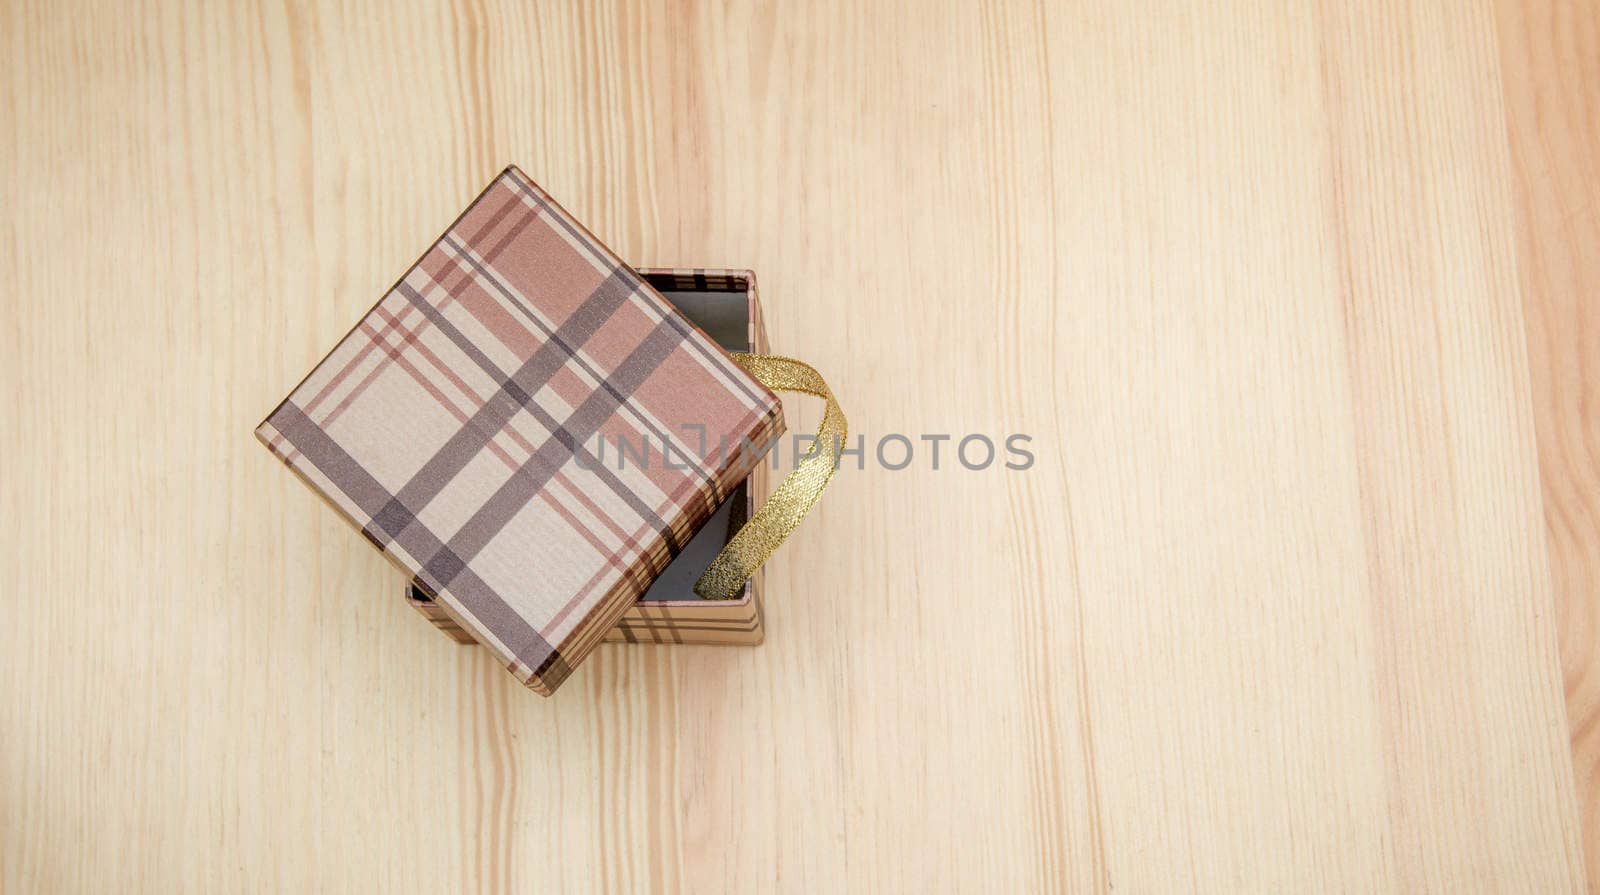 the gift box on a wooden table